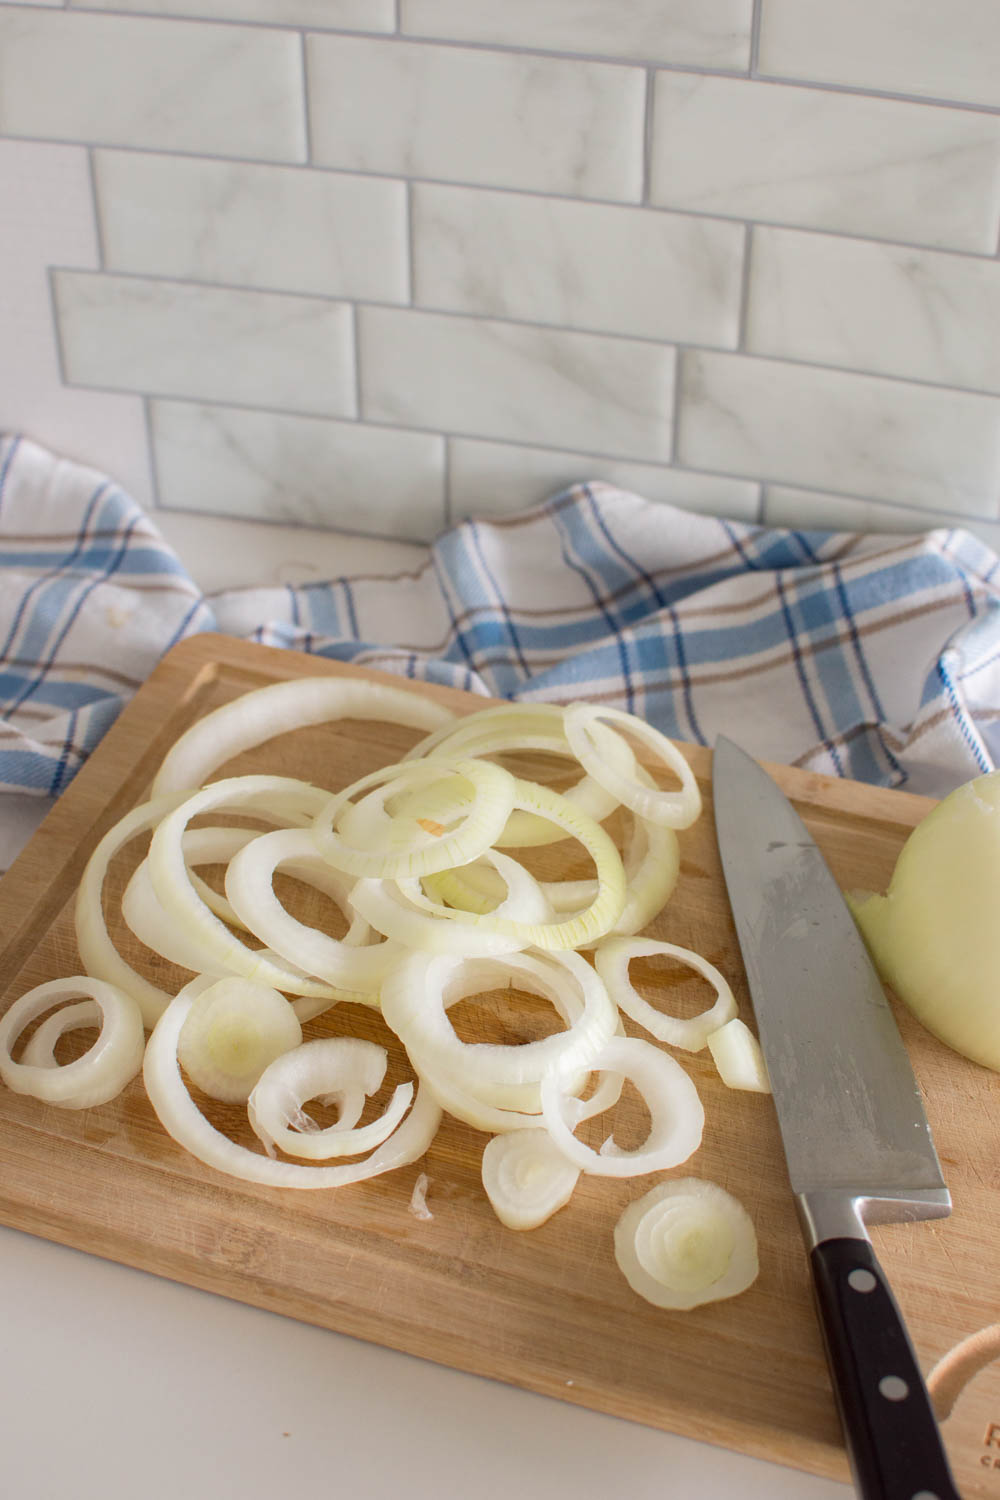 Cutting onions into rings on a wooden cutting board